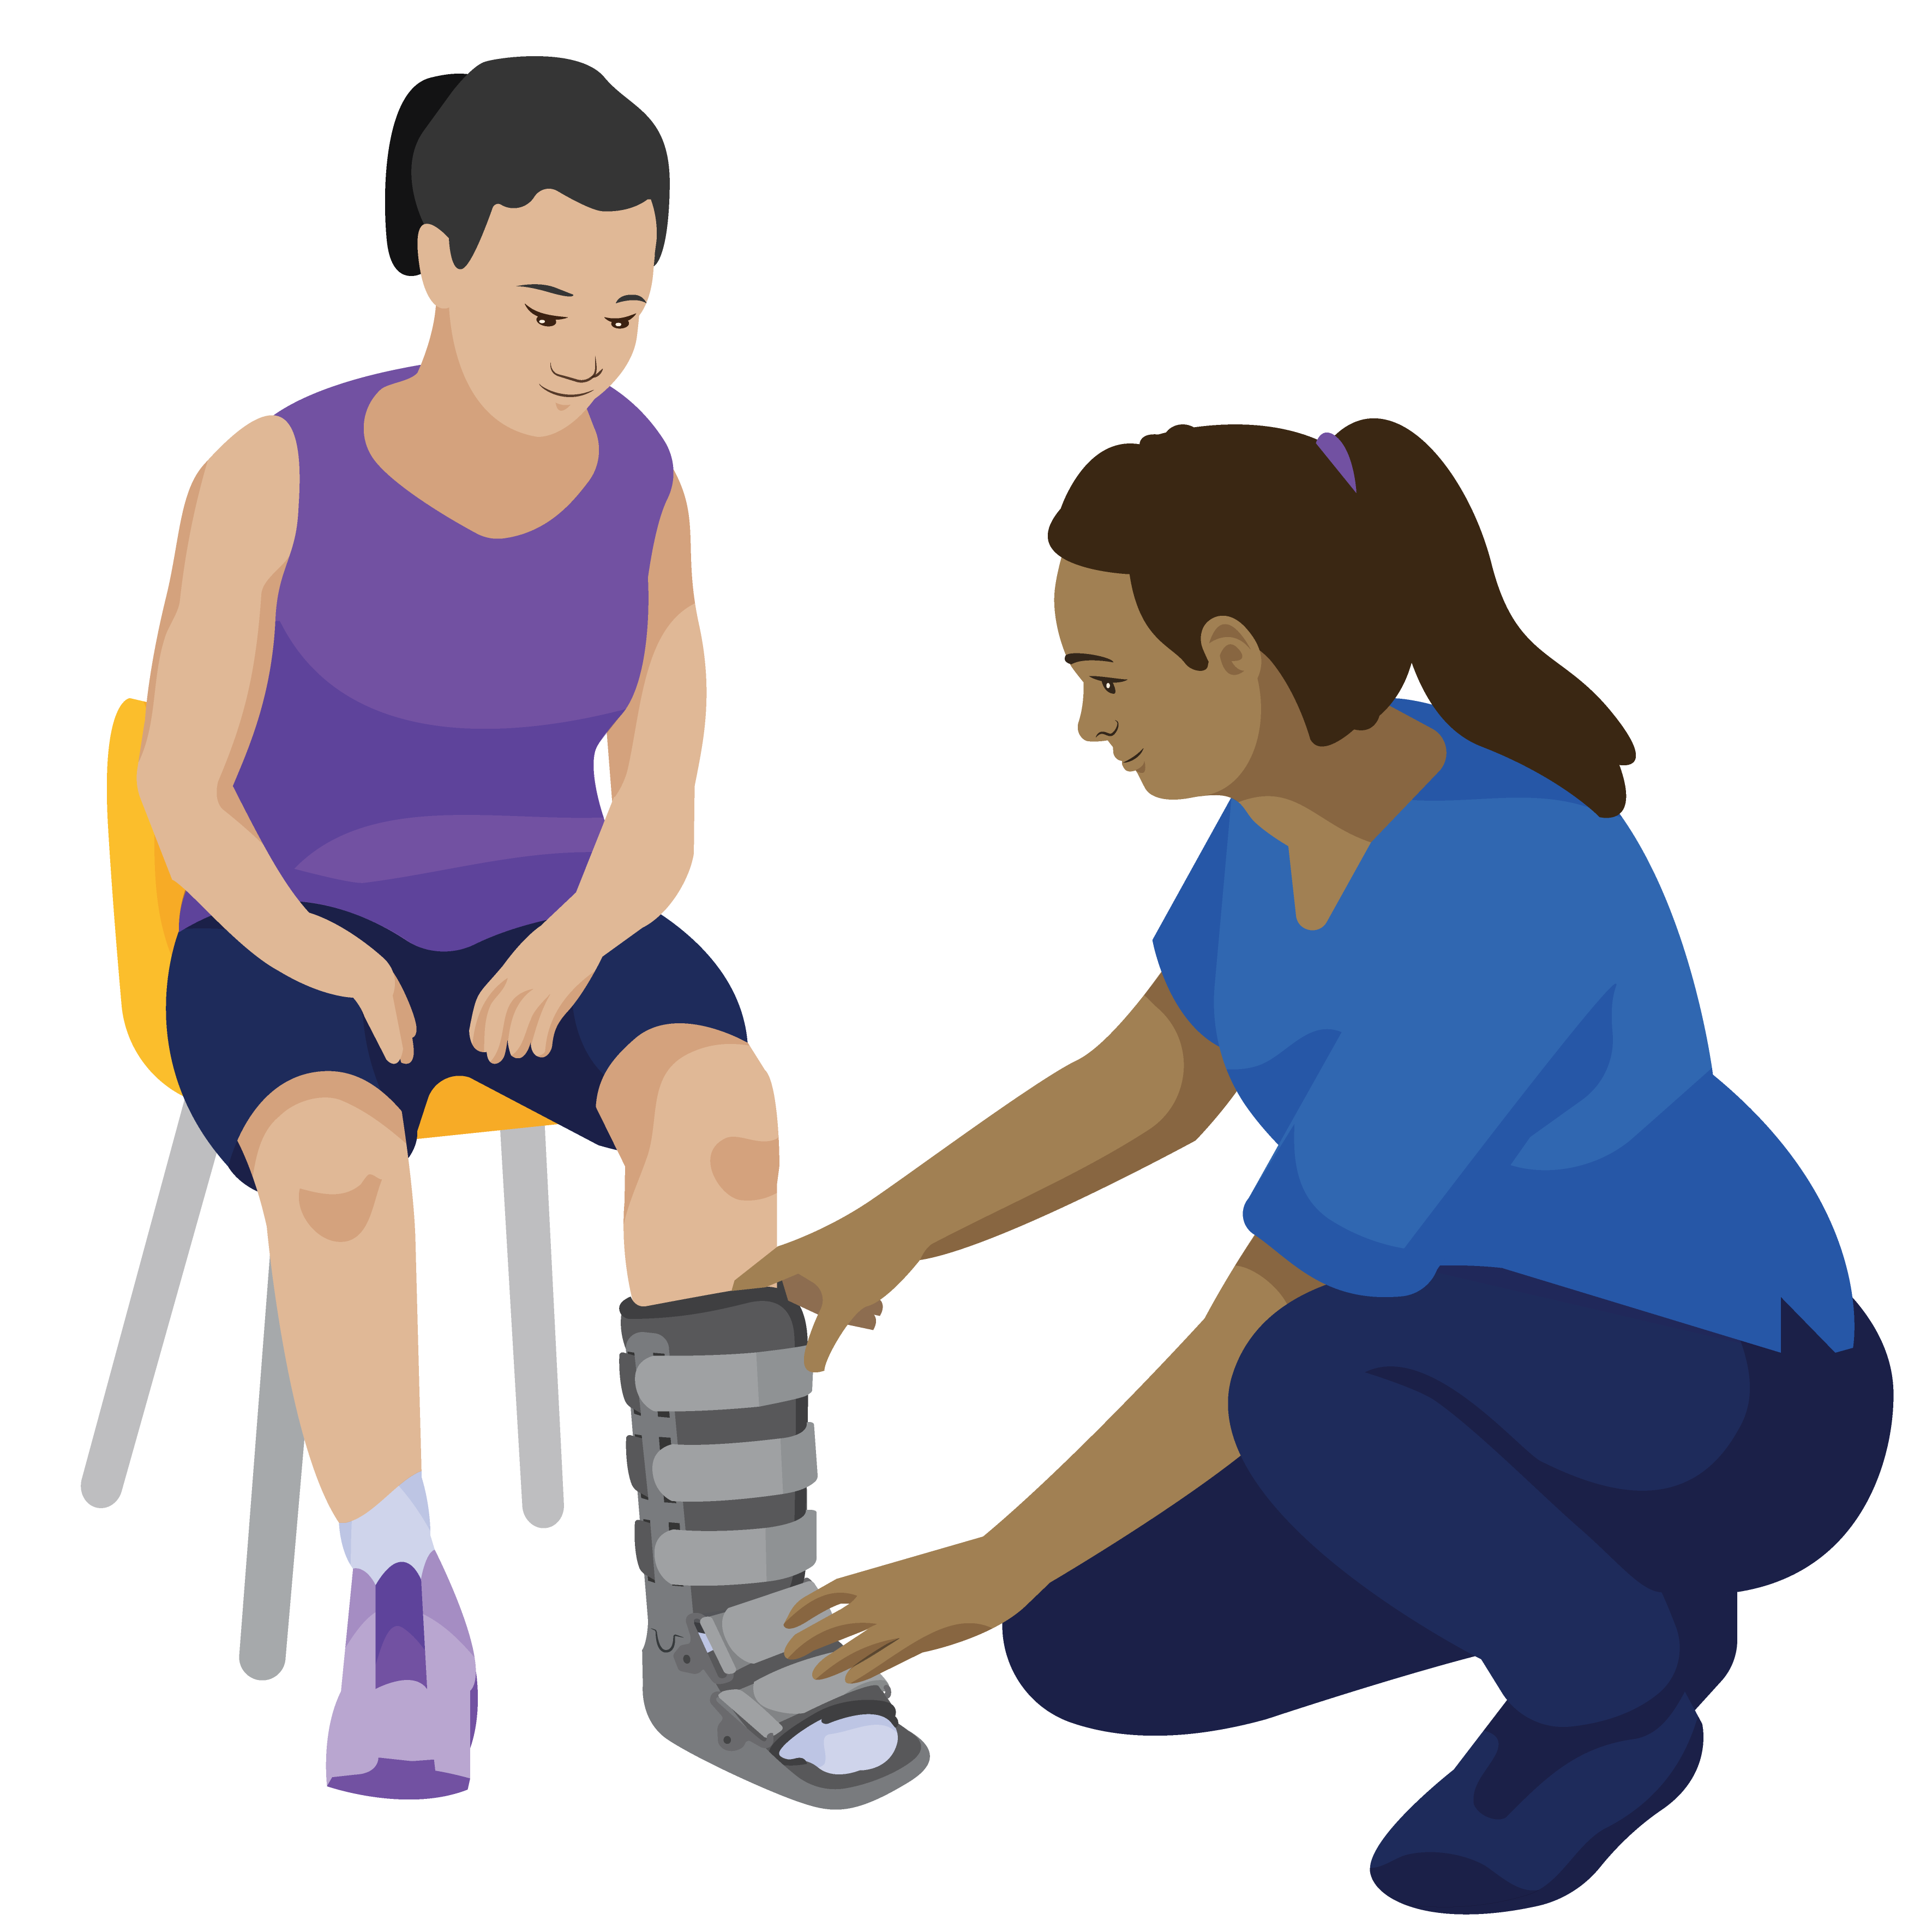 A colourful illustration of a health worker crouching down to check the fit of a rigid removeable boot on a young woman's leg.